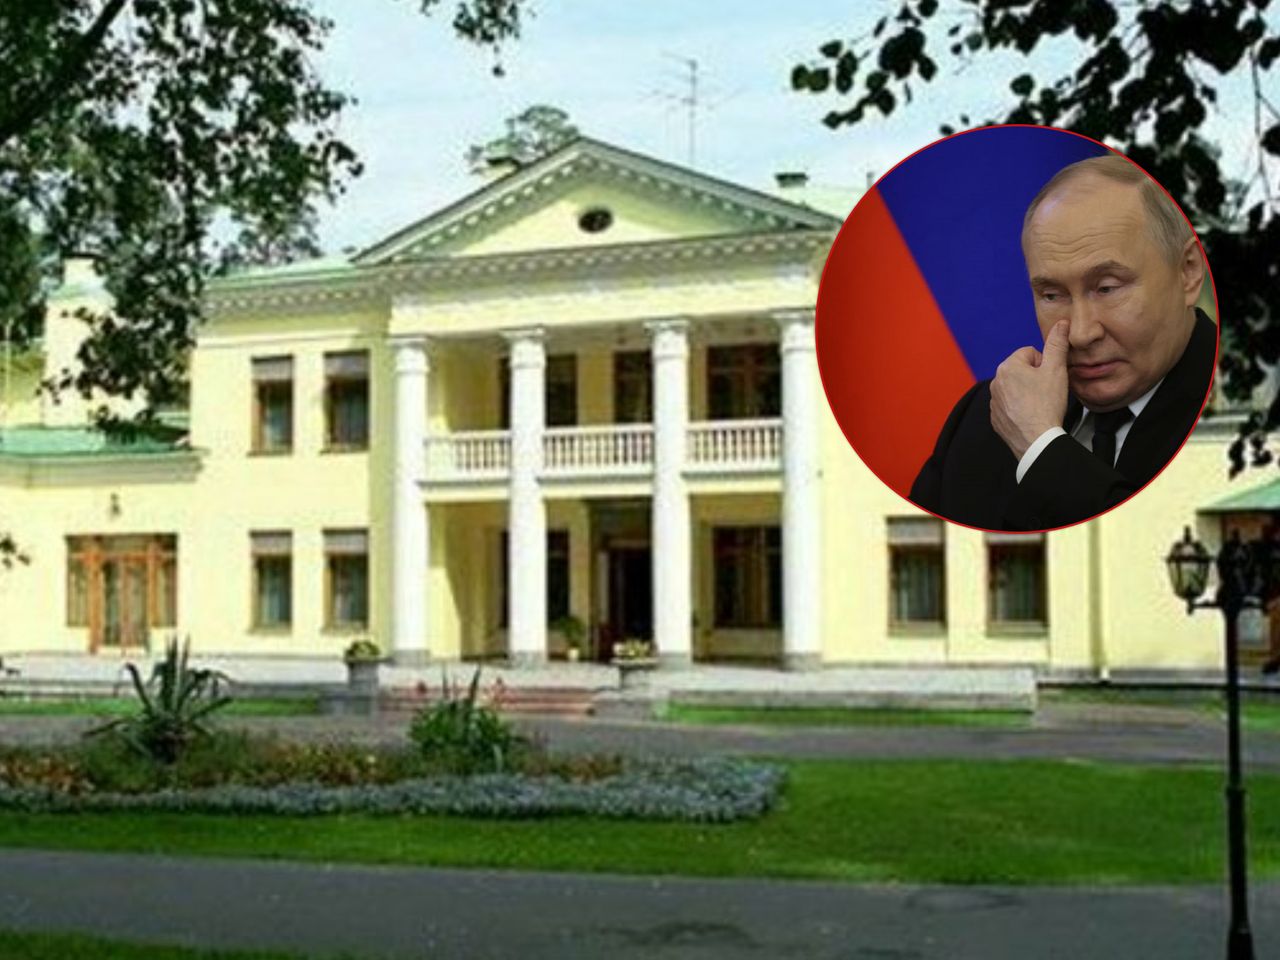 Russian scandal: Secrets of Putin's residence accidentally exposed